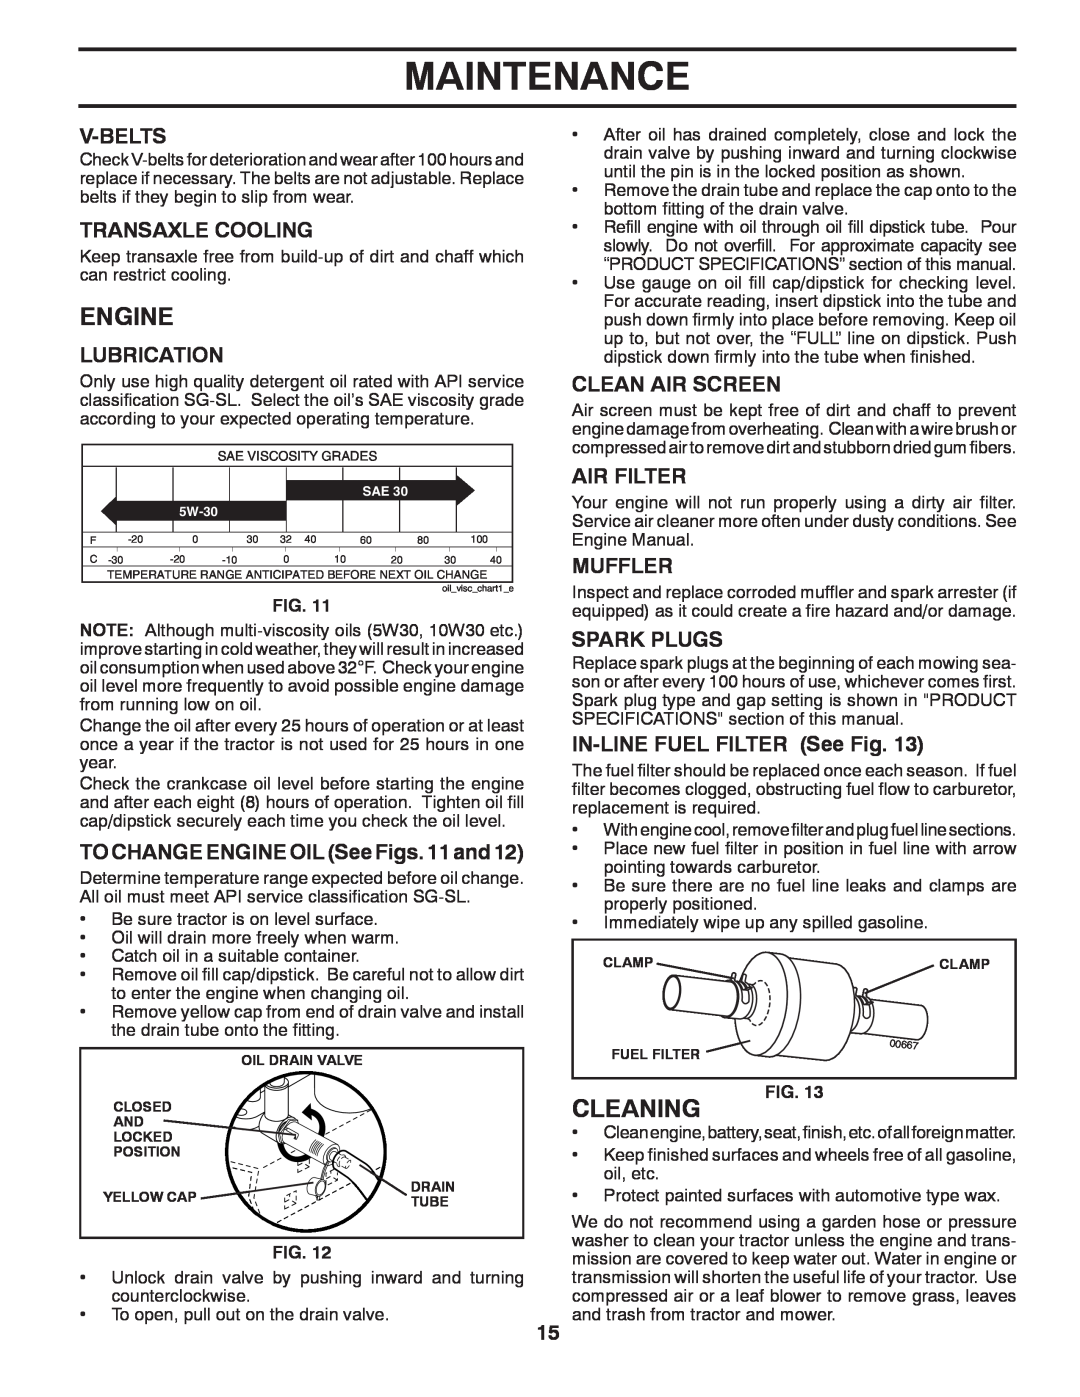 Poulan 424634 Engine, Cleaning, V-Belts, Transaxle Cooling, Lubrication, TO CHANGE ENGINE OIL See Figs. 11 and, Air Filter 